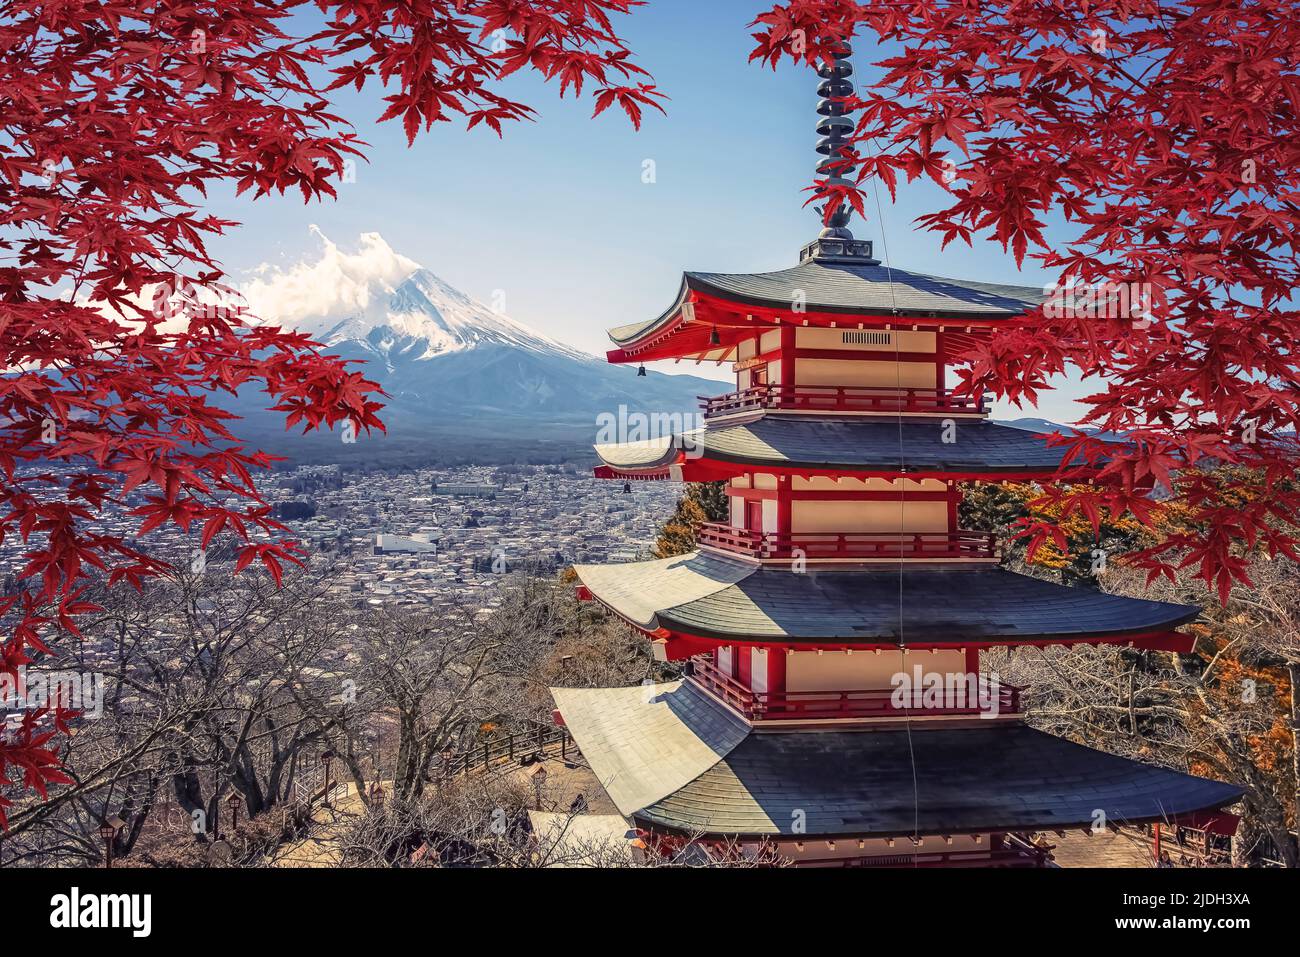 Famous Place of Japan with Chureito Pagoda and Mount Fuji in daytime Stock Photo